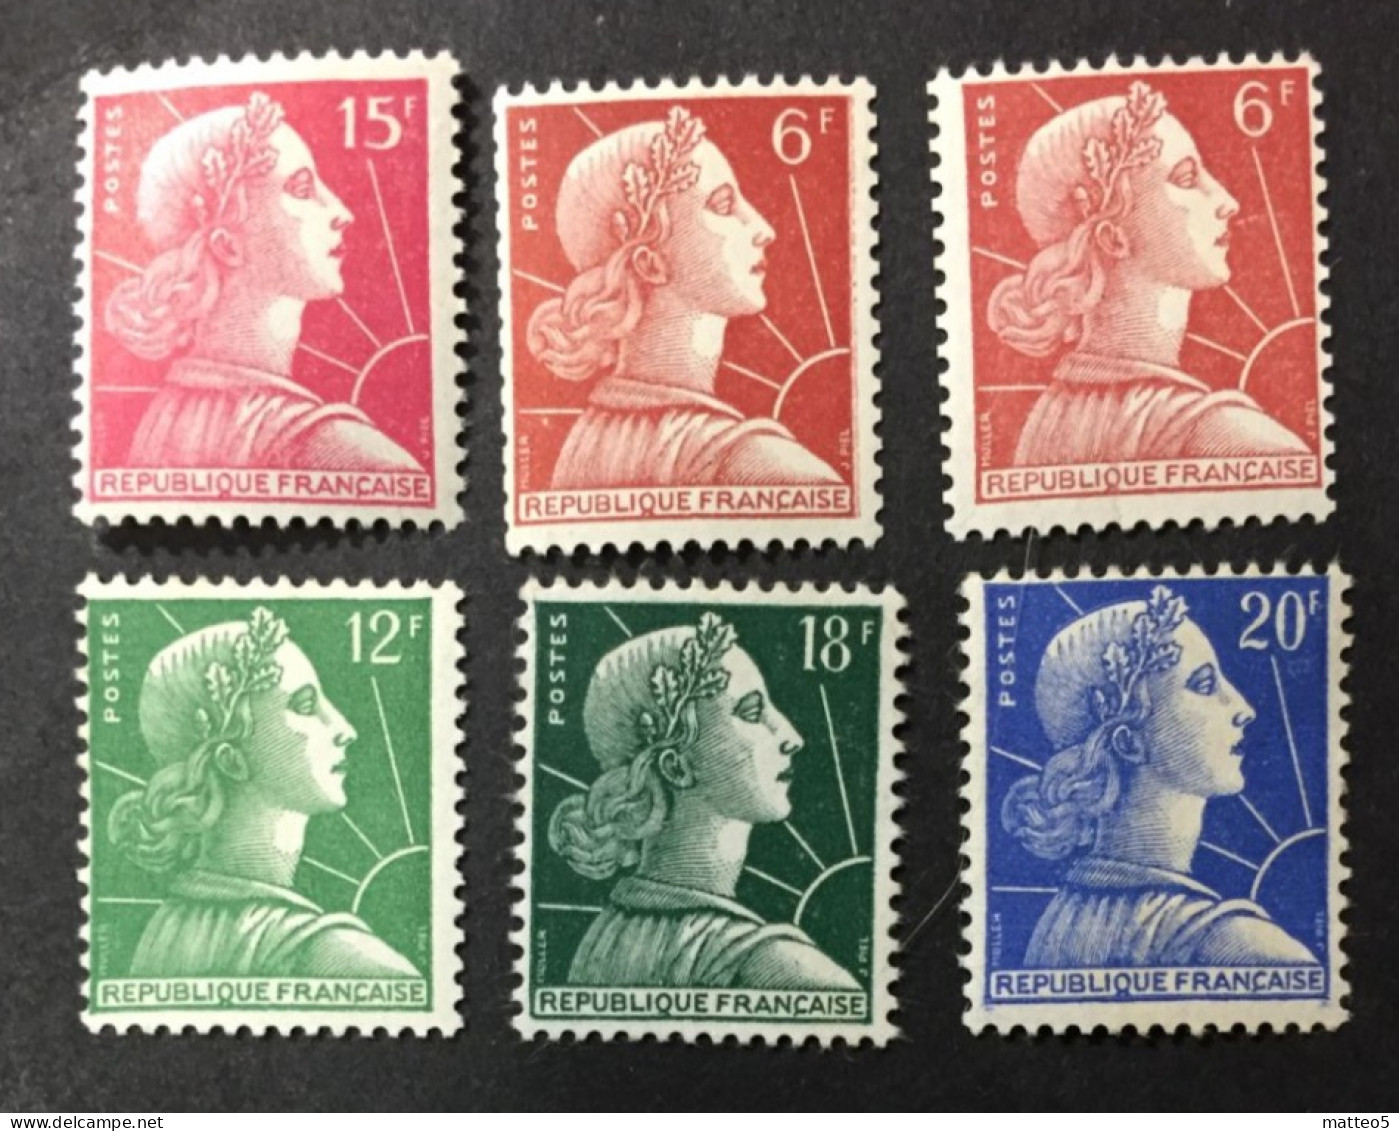 1955 /59  France - Liberty - Marianne De Muller - 6  Stamps Unused - 1955-1961 Marianna Di Muller